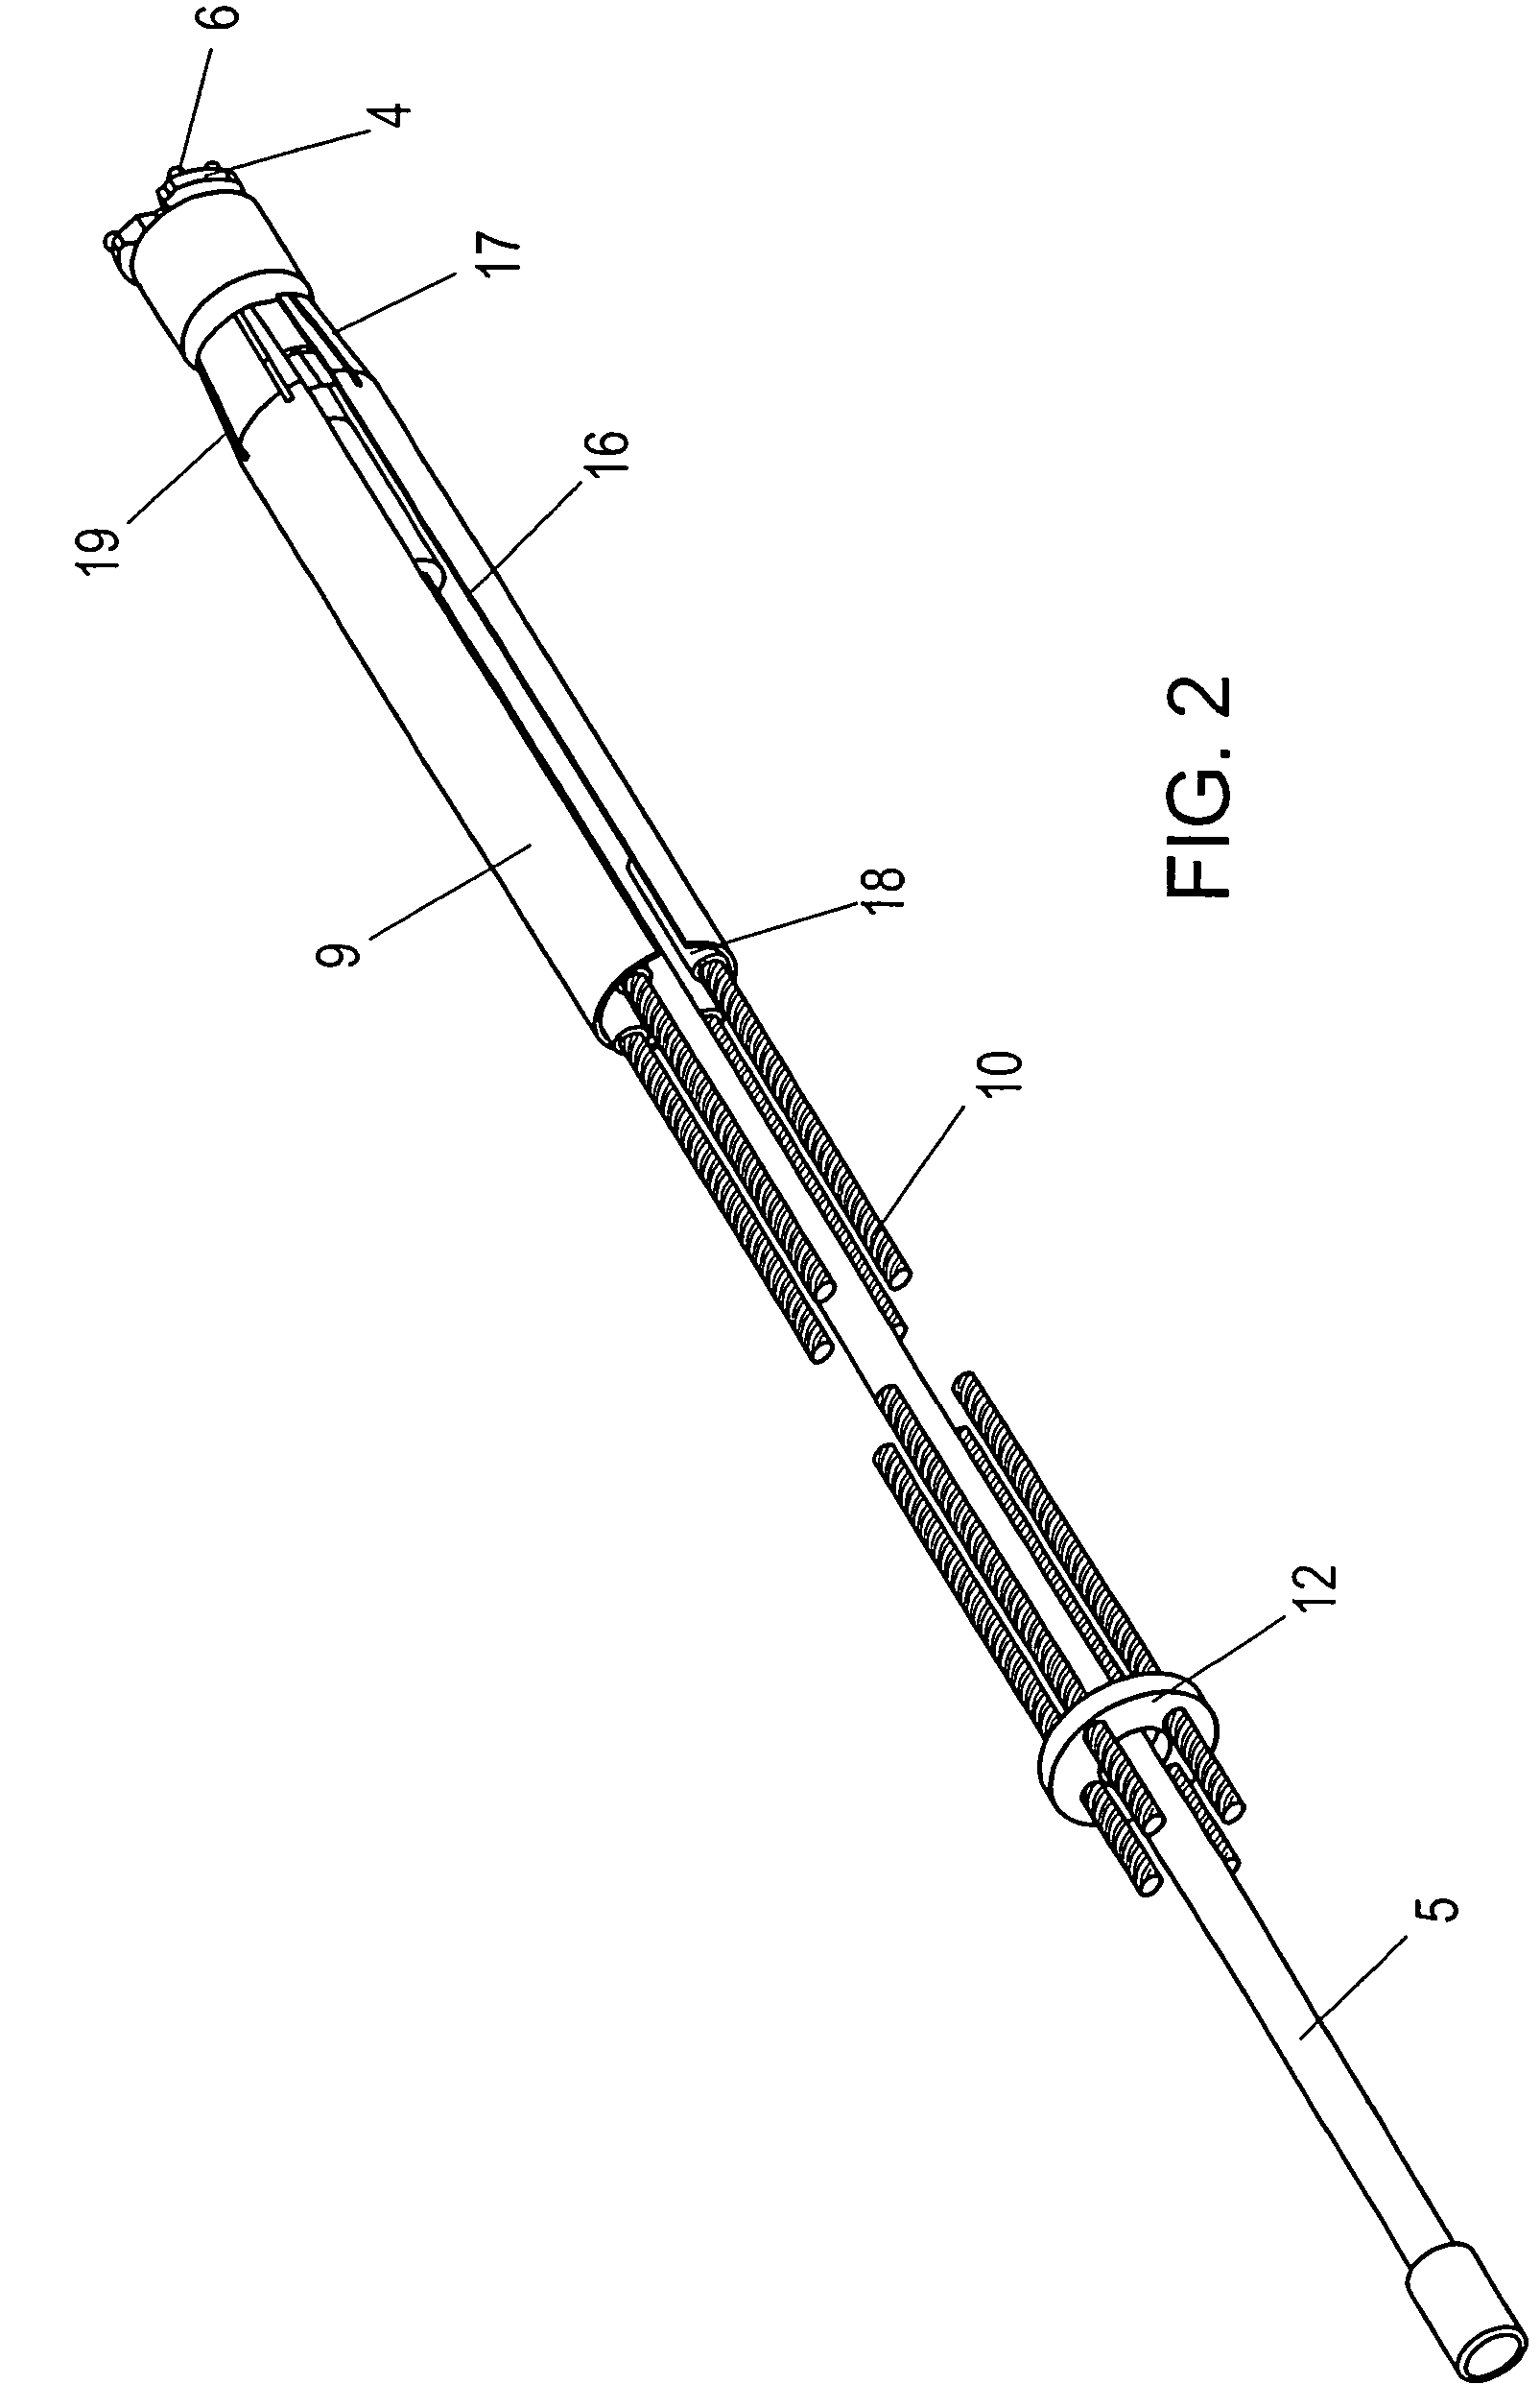 Method and device for drilling a hole in soil or rock material and for forming an anchoring